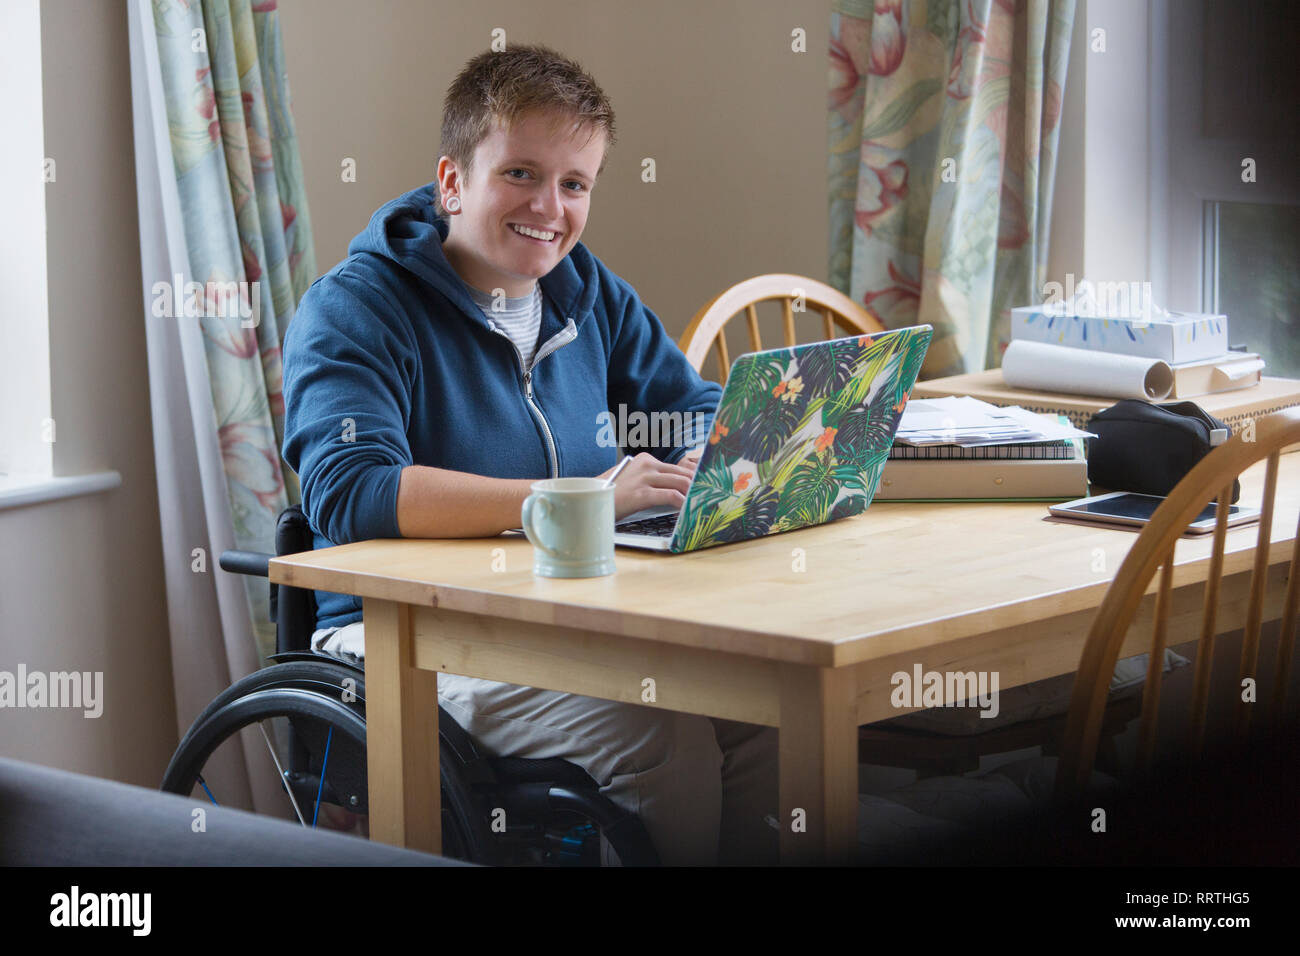 Portrait smiling, confident young woman in wheelchair using laptop at dining table Stock Photo